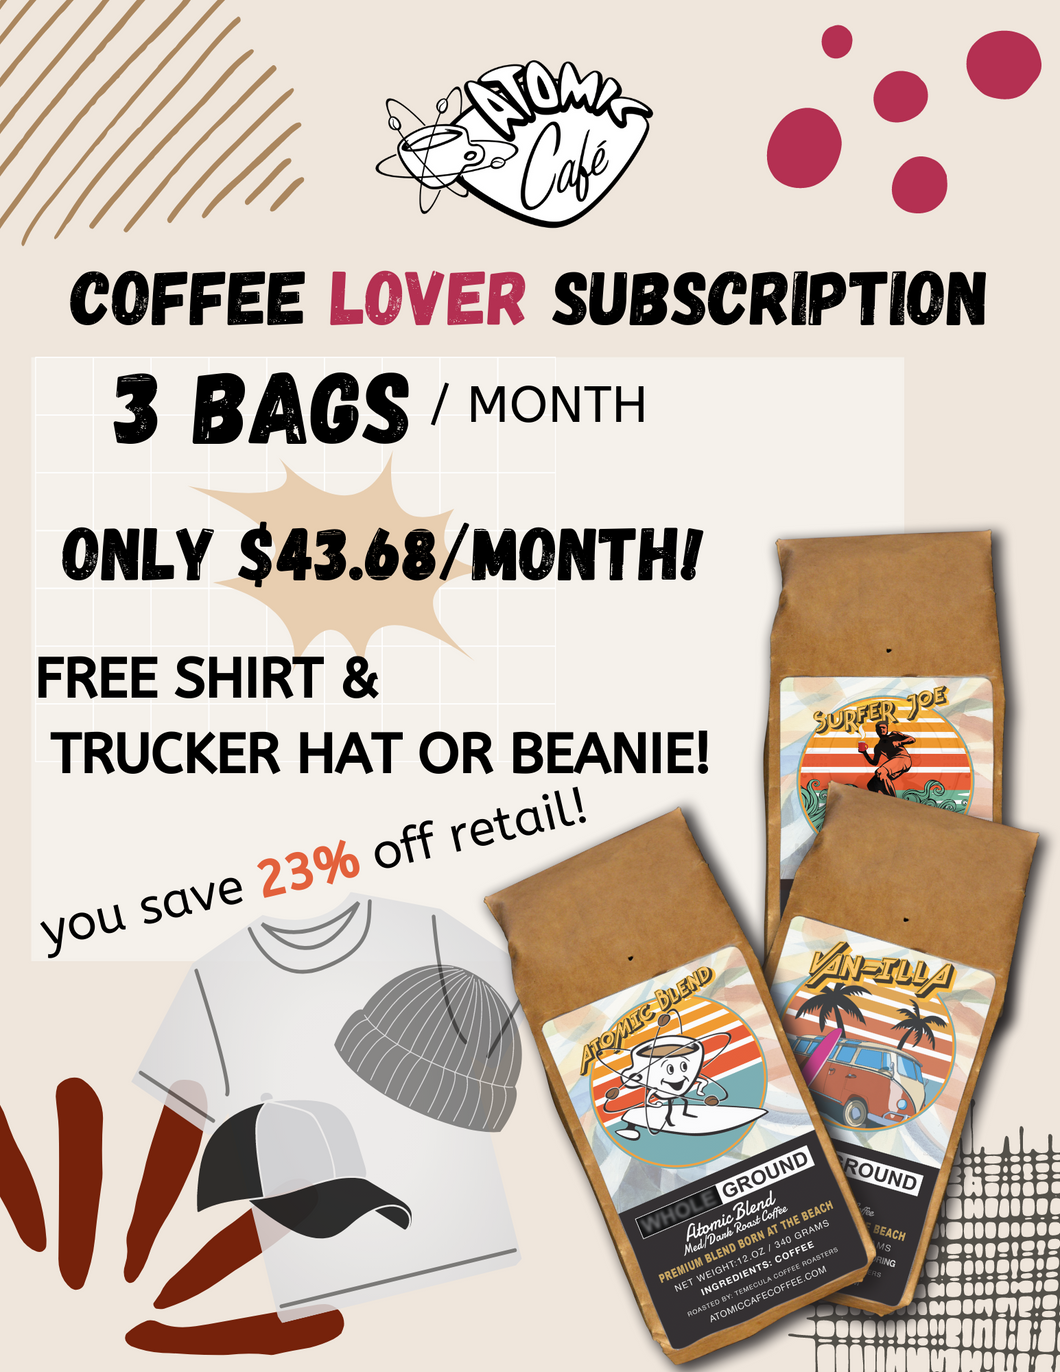 COFFEE LOVER SUBSCRIPTION - 3 bags/ month (read more)